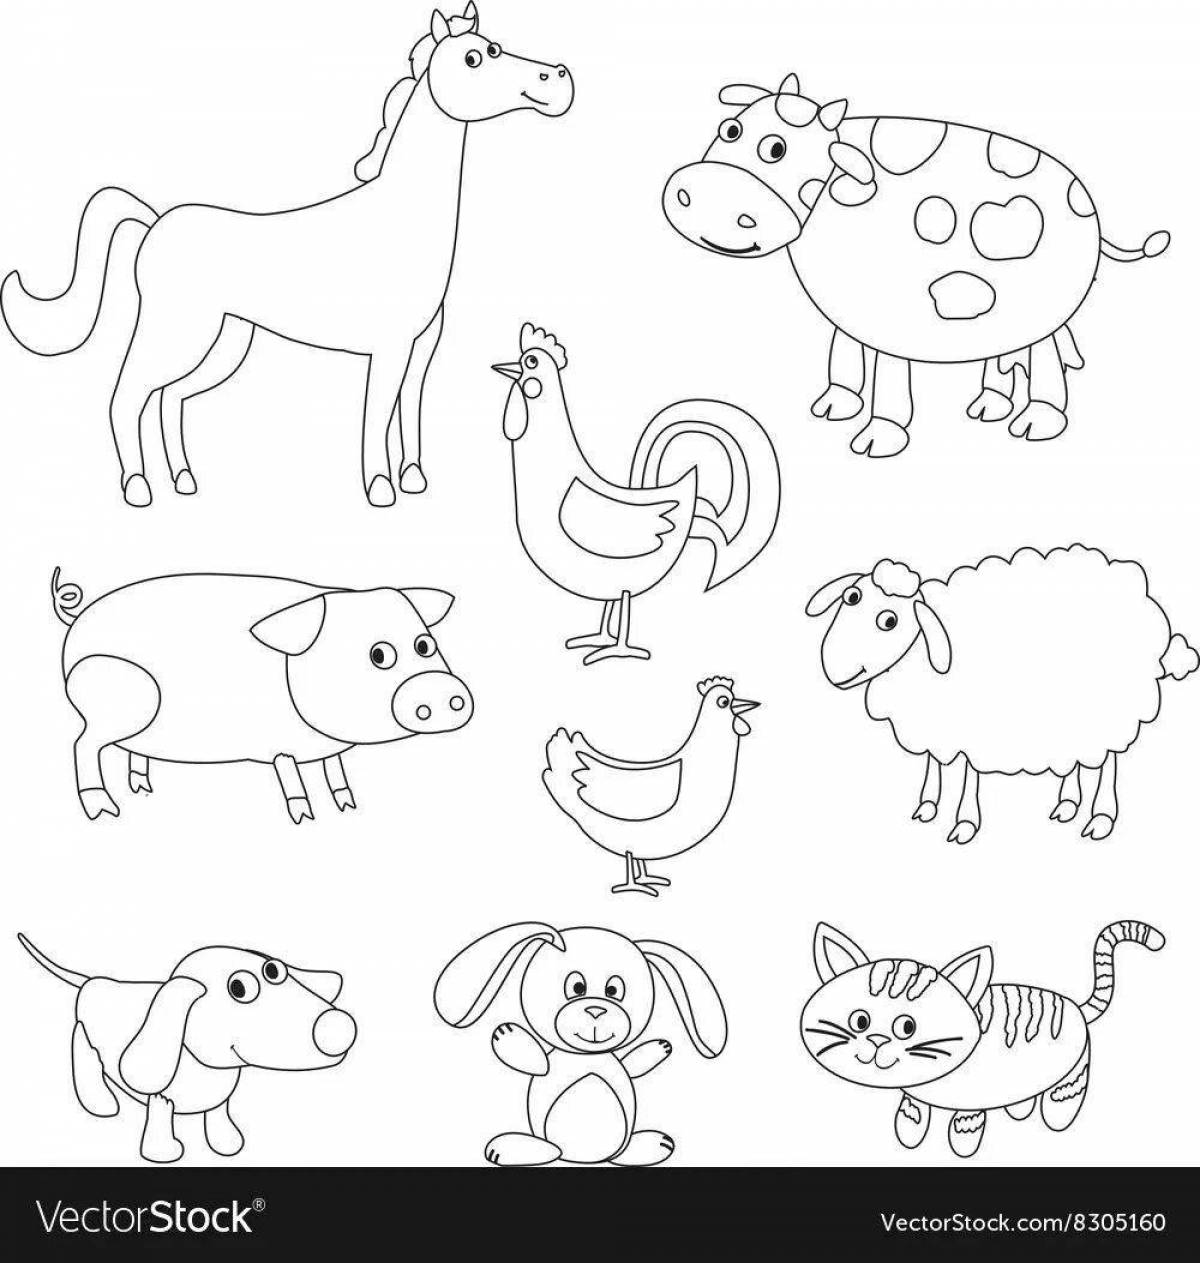 Pets on one sheet #4